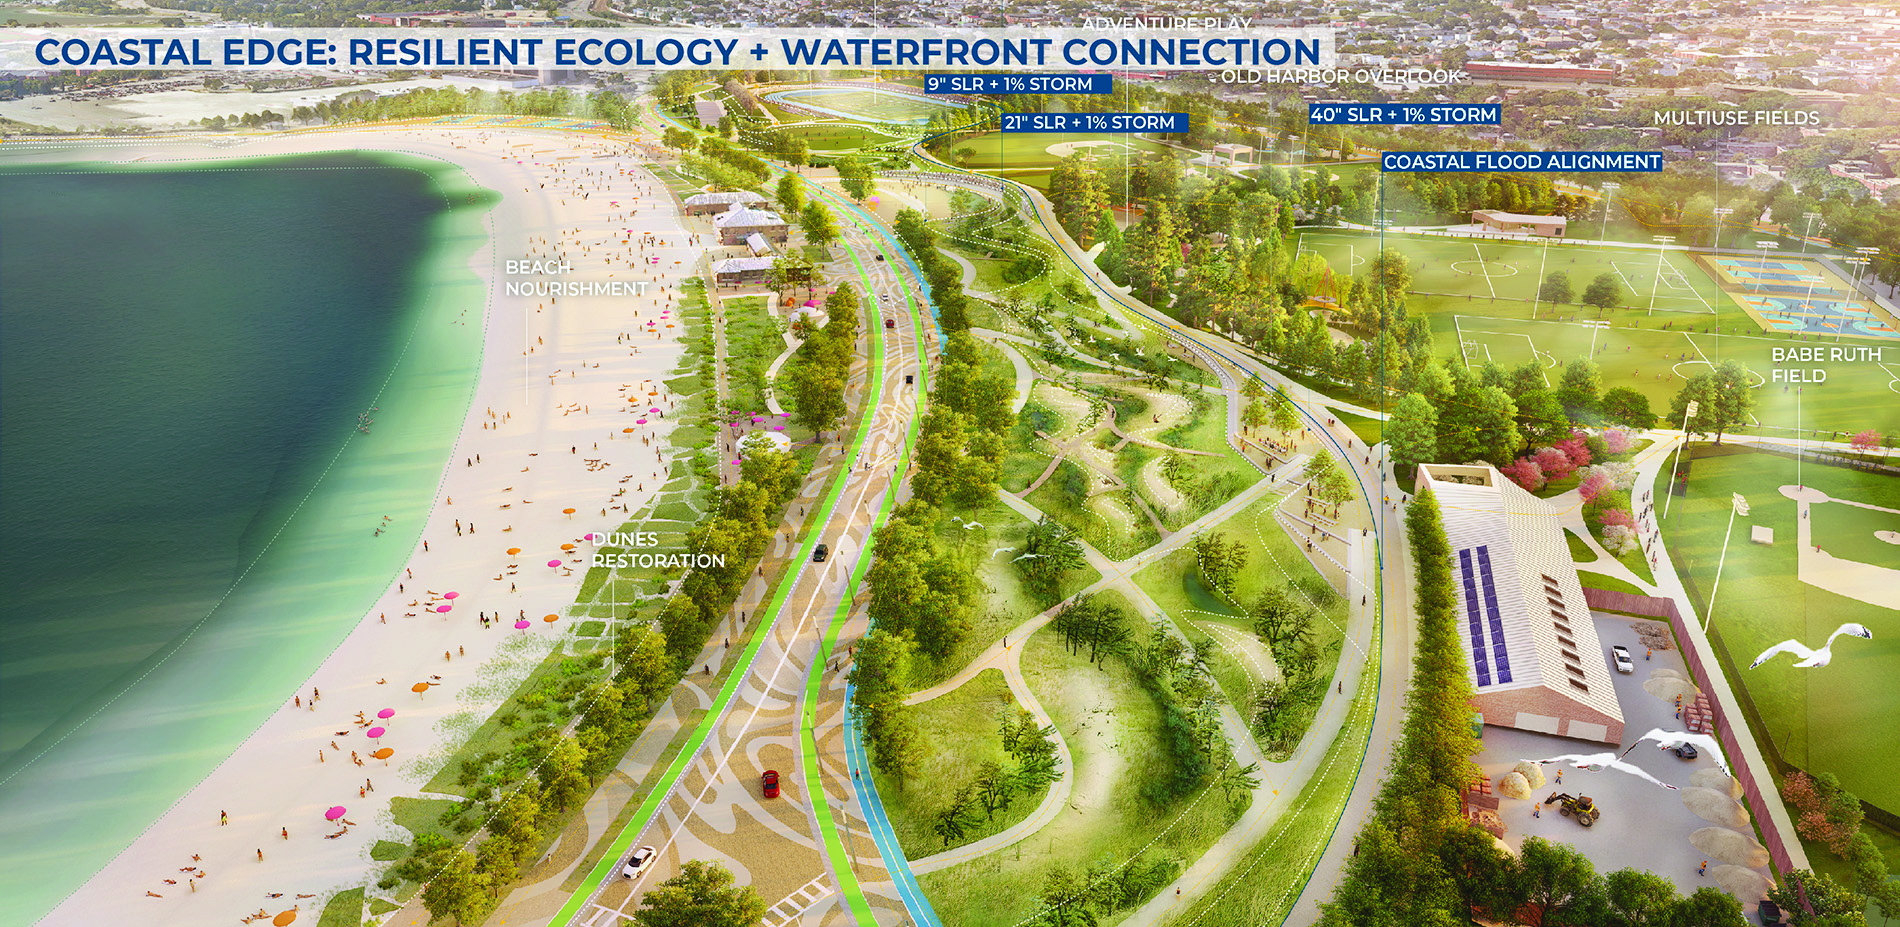 Coastal Edge: Resilient Ecology and Waterfront Connection